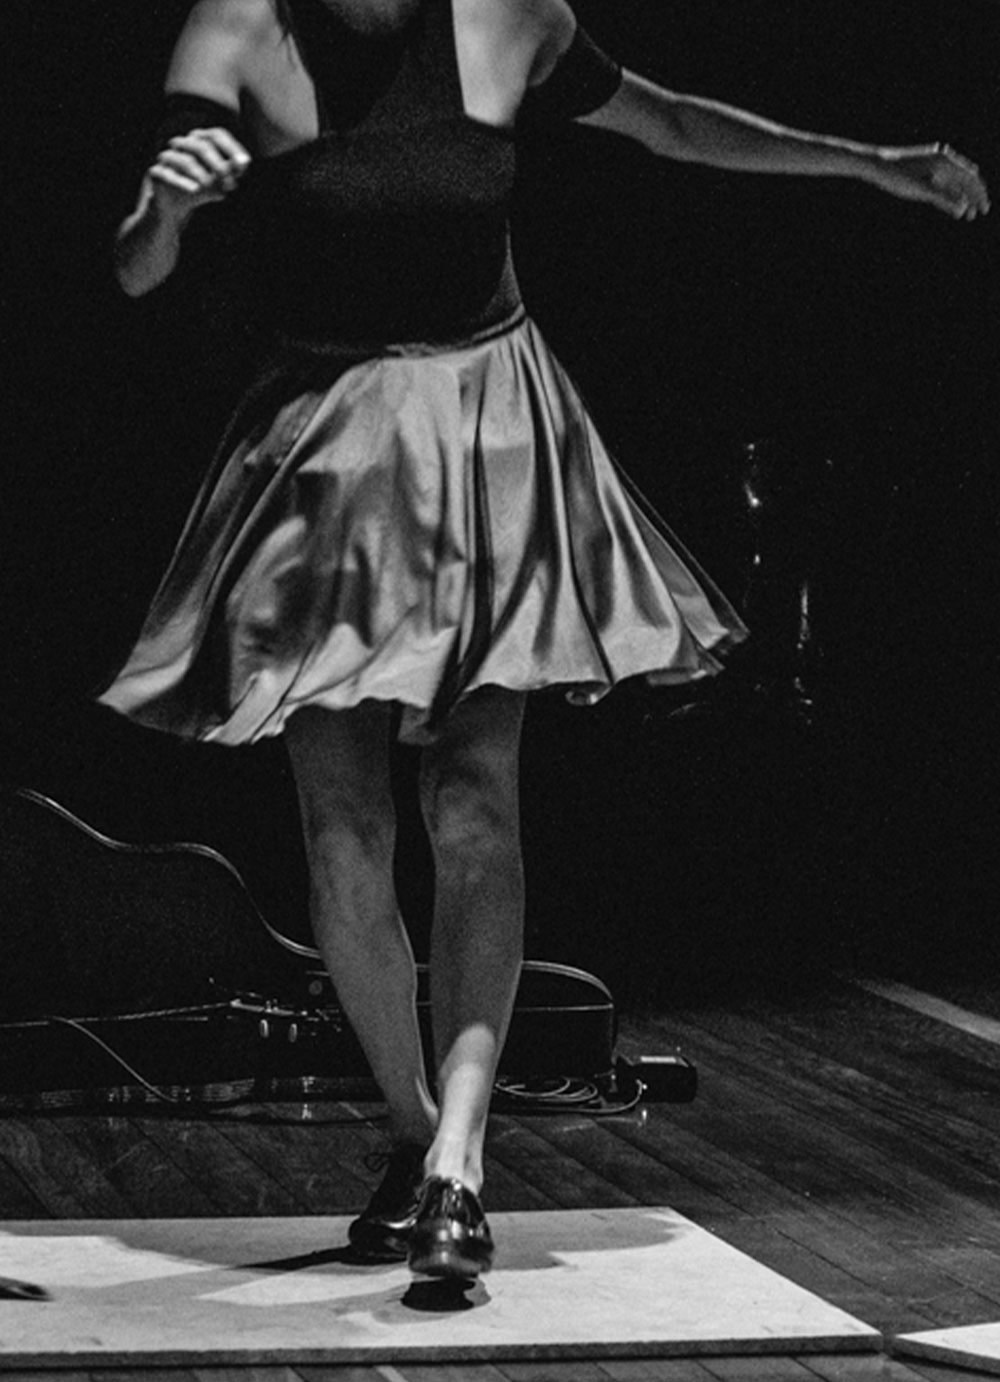 Black and white photo of a tap dancer standing on a small square wooden platform. She wears black tights, silver skirt and black shoes. Behind the tap dancer, a ukulele case lying on the stage.